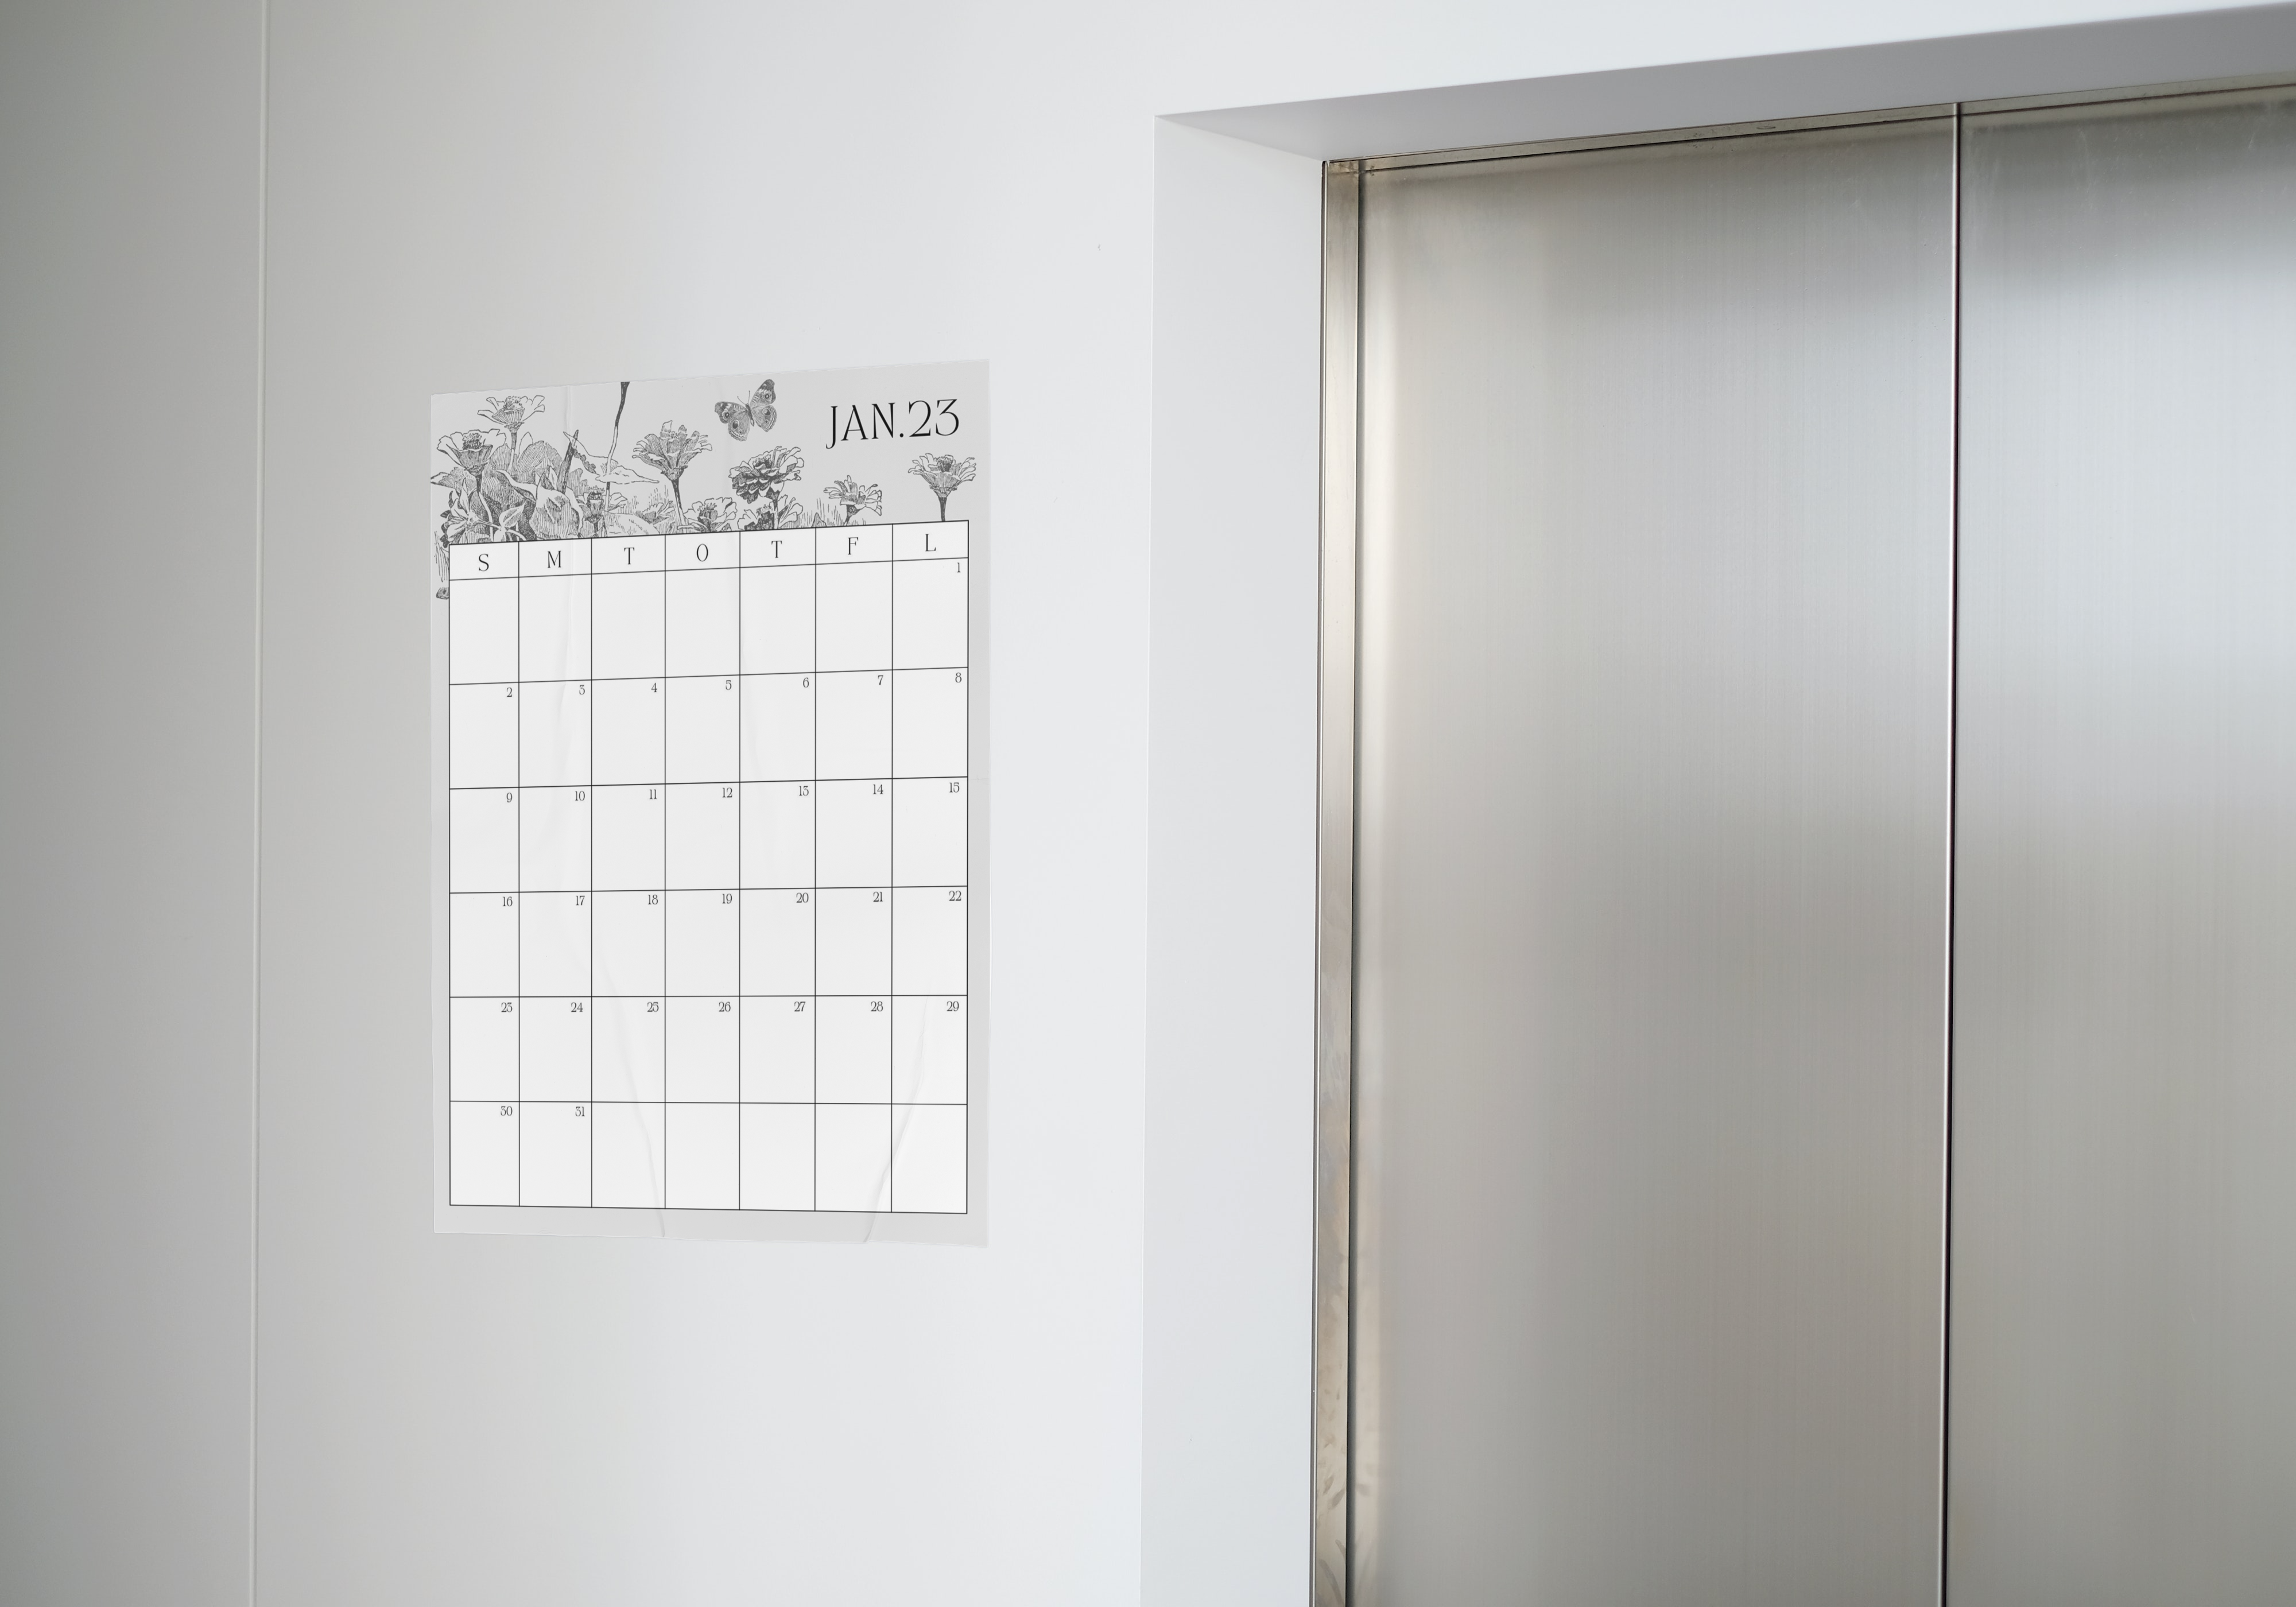 Glued-portrait-poster-on-the-wall-near-the-elevator_Page-1_12-from-2022-Calendar-Planner-Nature-Botanical-Plants-Insects-Illustrated-Vintage-Grey-A4.png